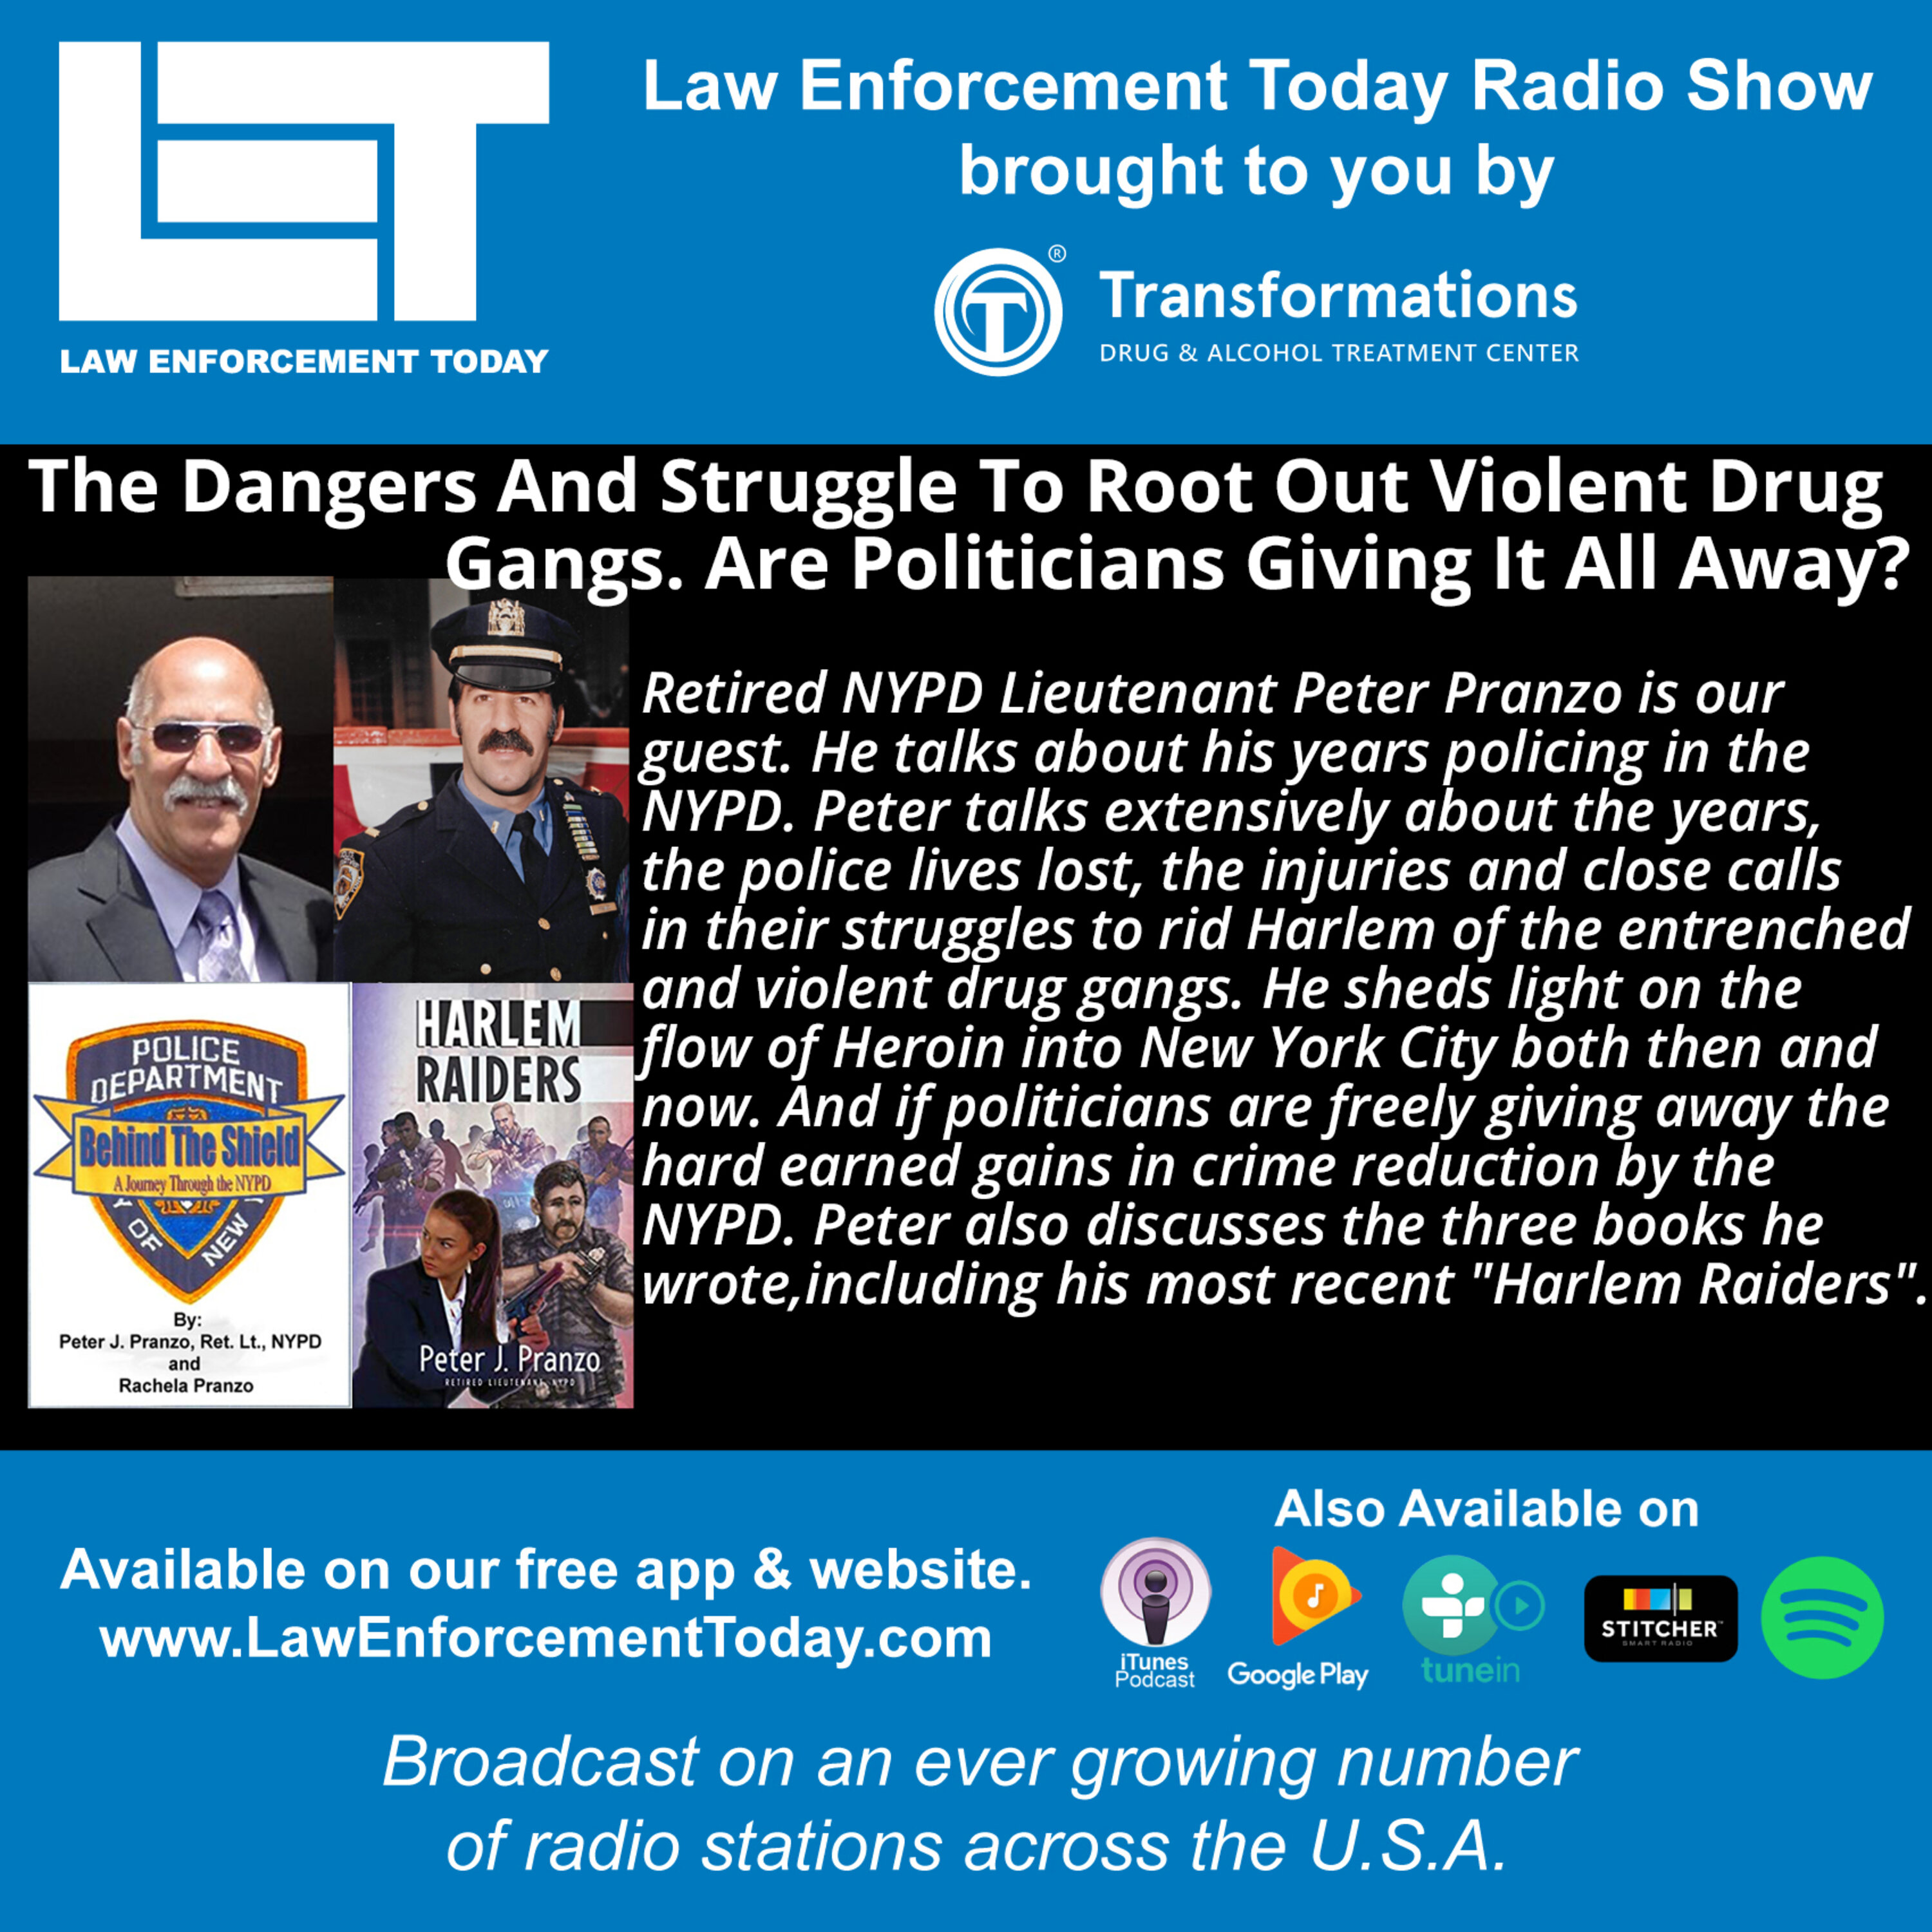 S4E52: The Dangers And Struggle To Root Out Drug Gangs. Are Politicians Giving It All Back?